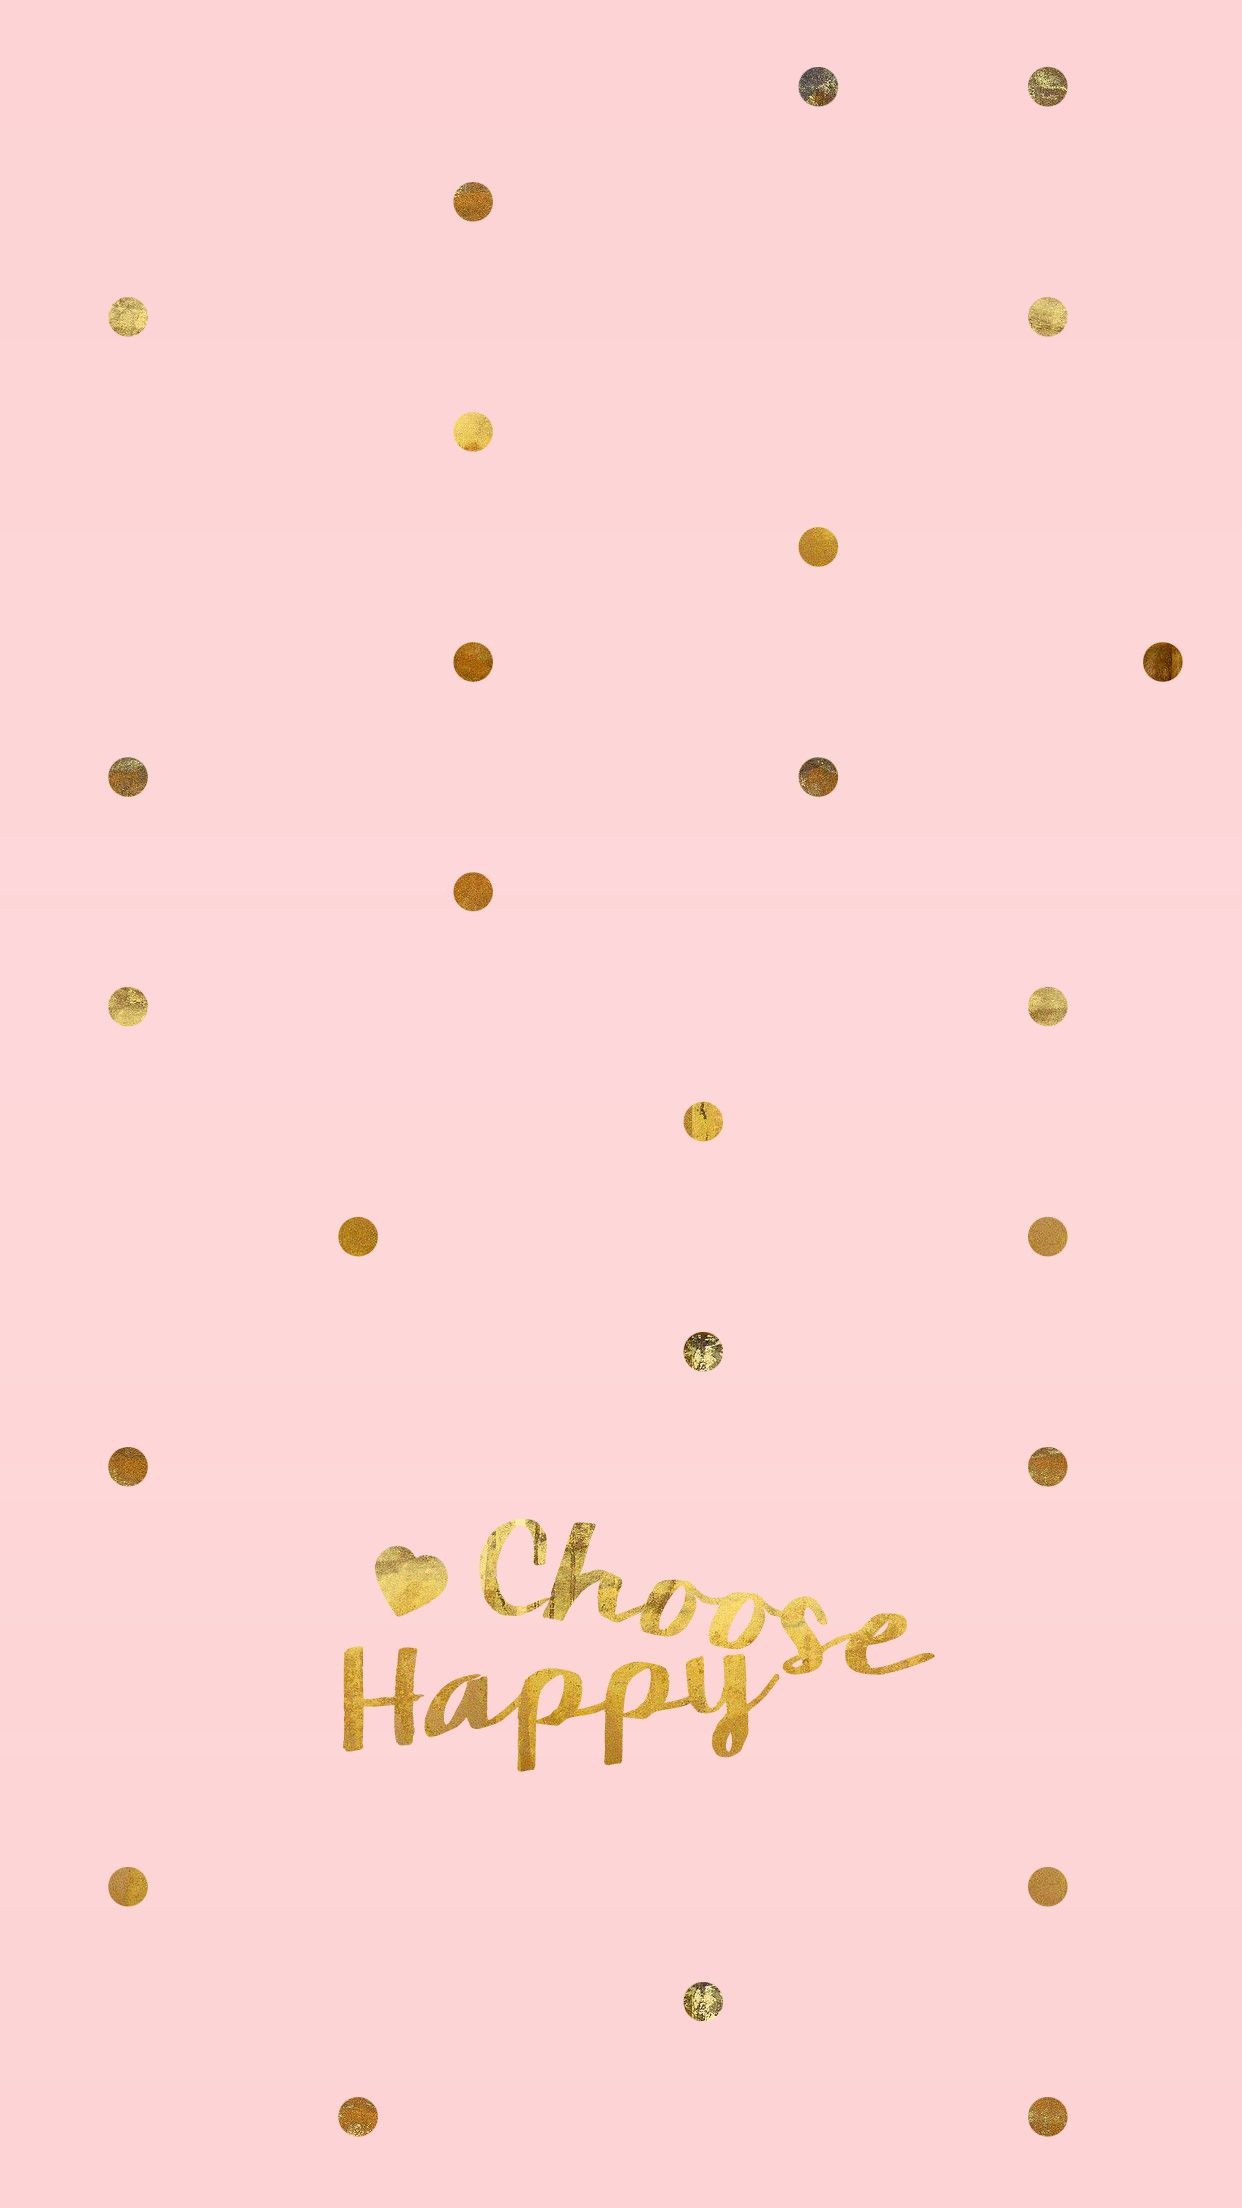 Choose happy wallpapers, Top free backgrounds, Opt for happiness, Positive choices, 1250x2210 HD Handy